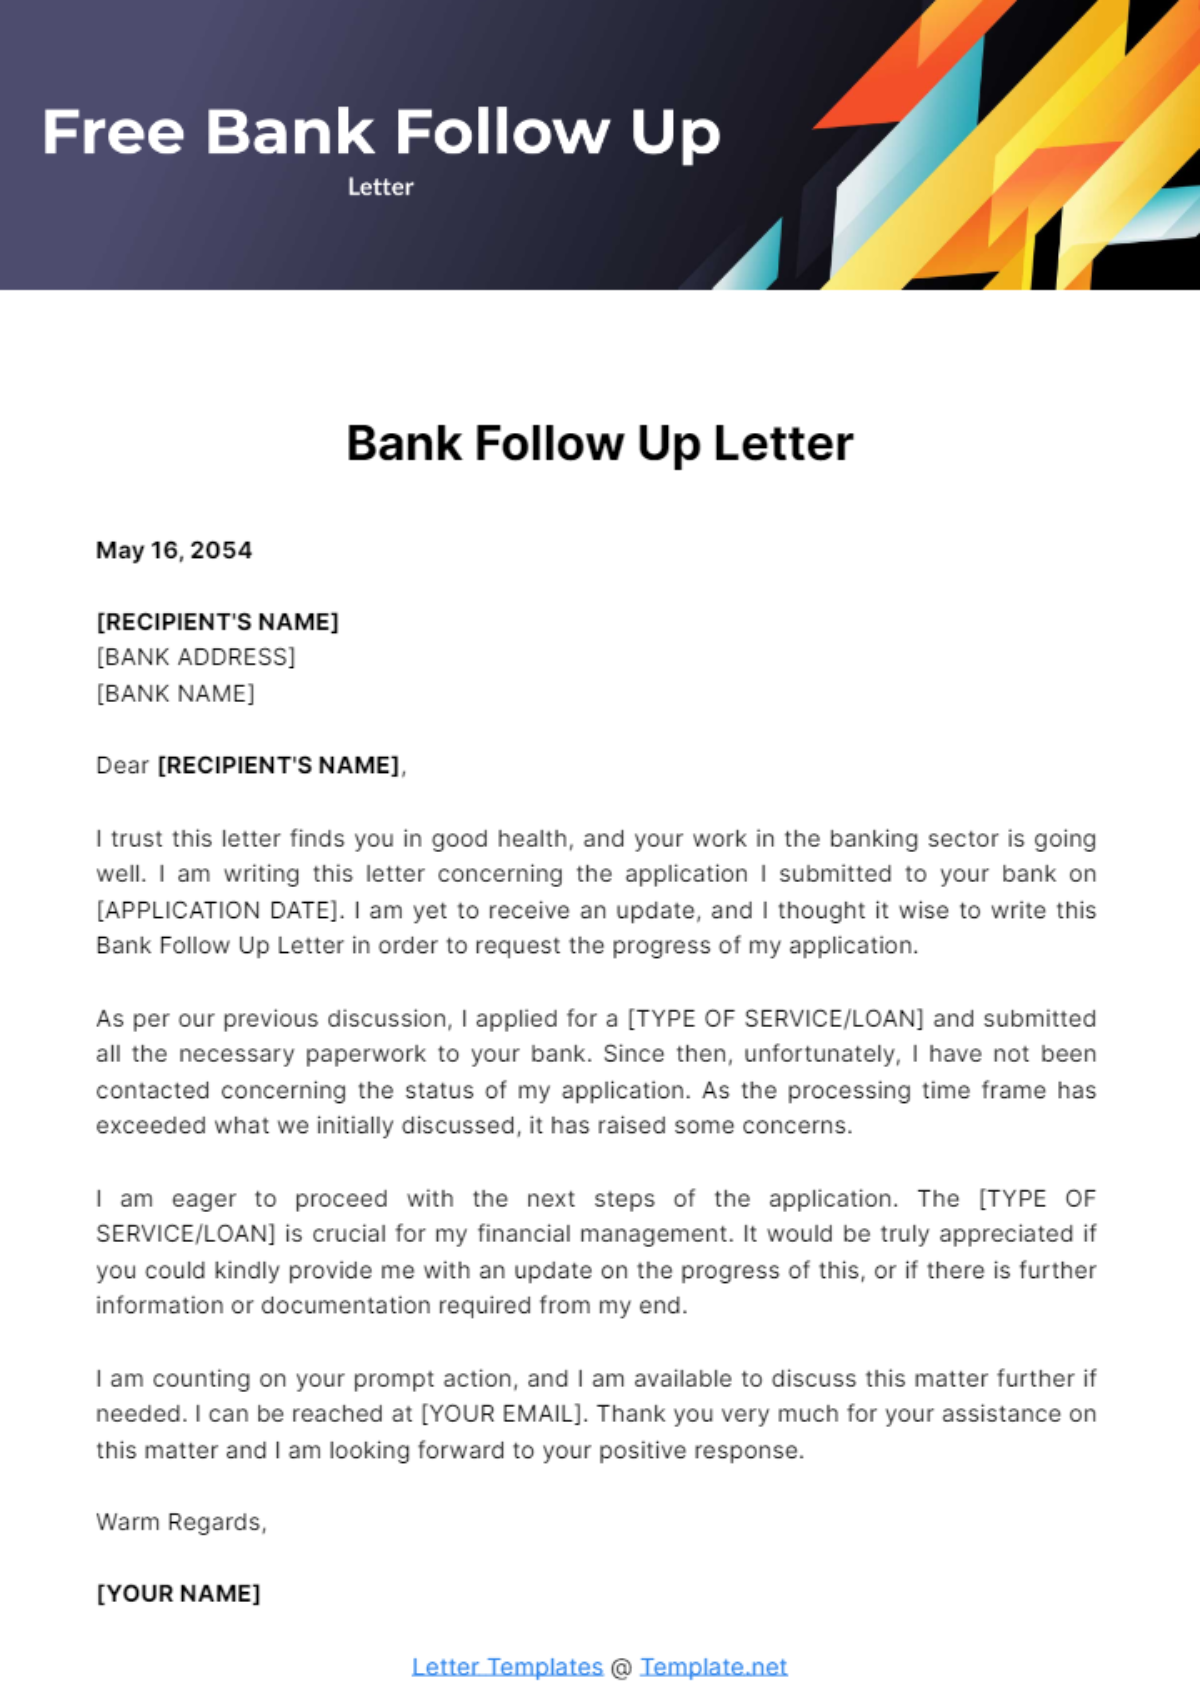 Free Bank Follow Up Letter Template